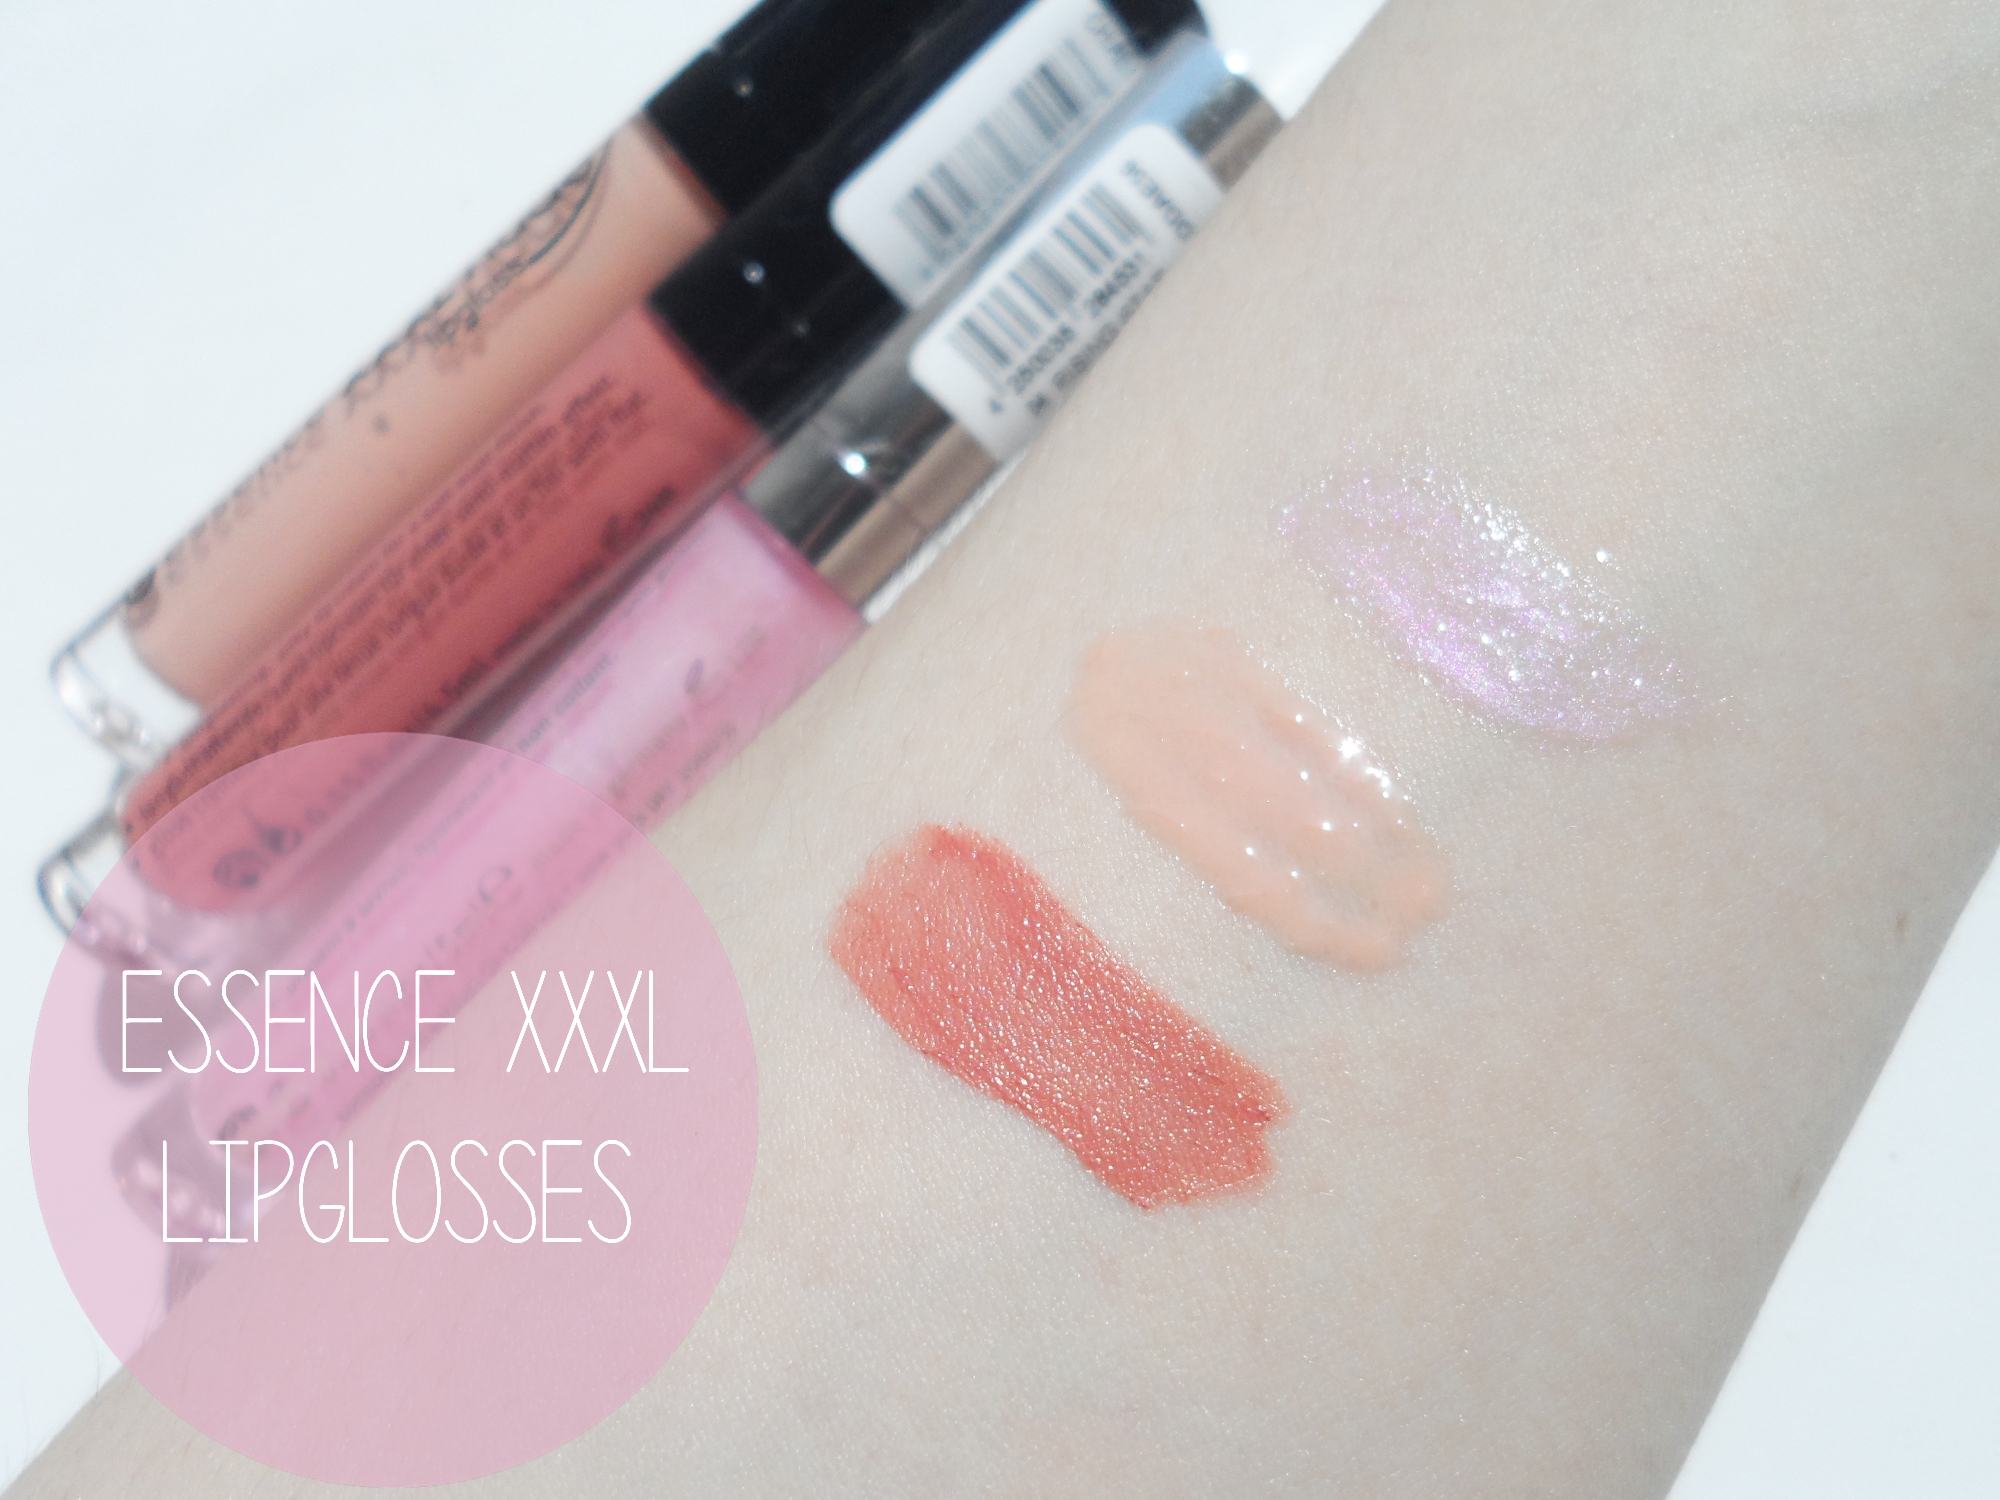 top 3 Essence Lip Glosses, beauty Review with Swatches and pictures by blogger liz breygel: rising star, soft nude, just nude